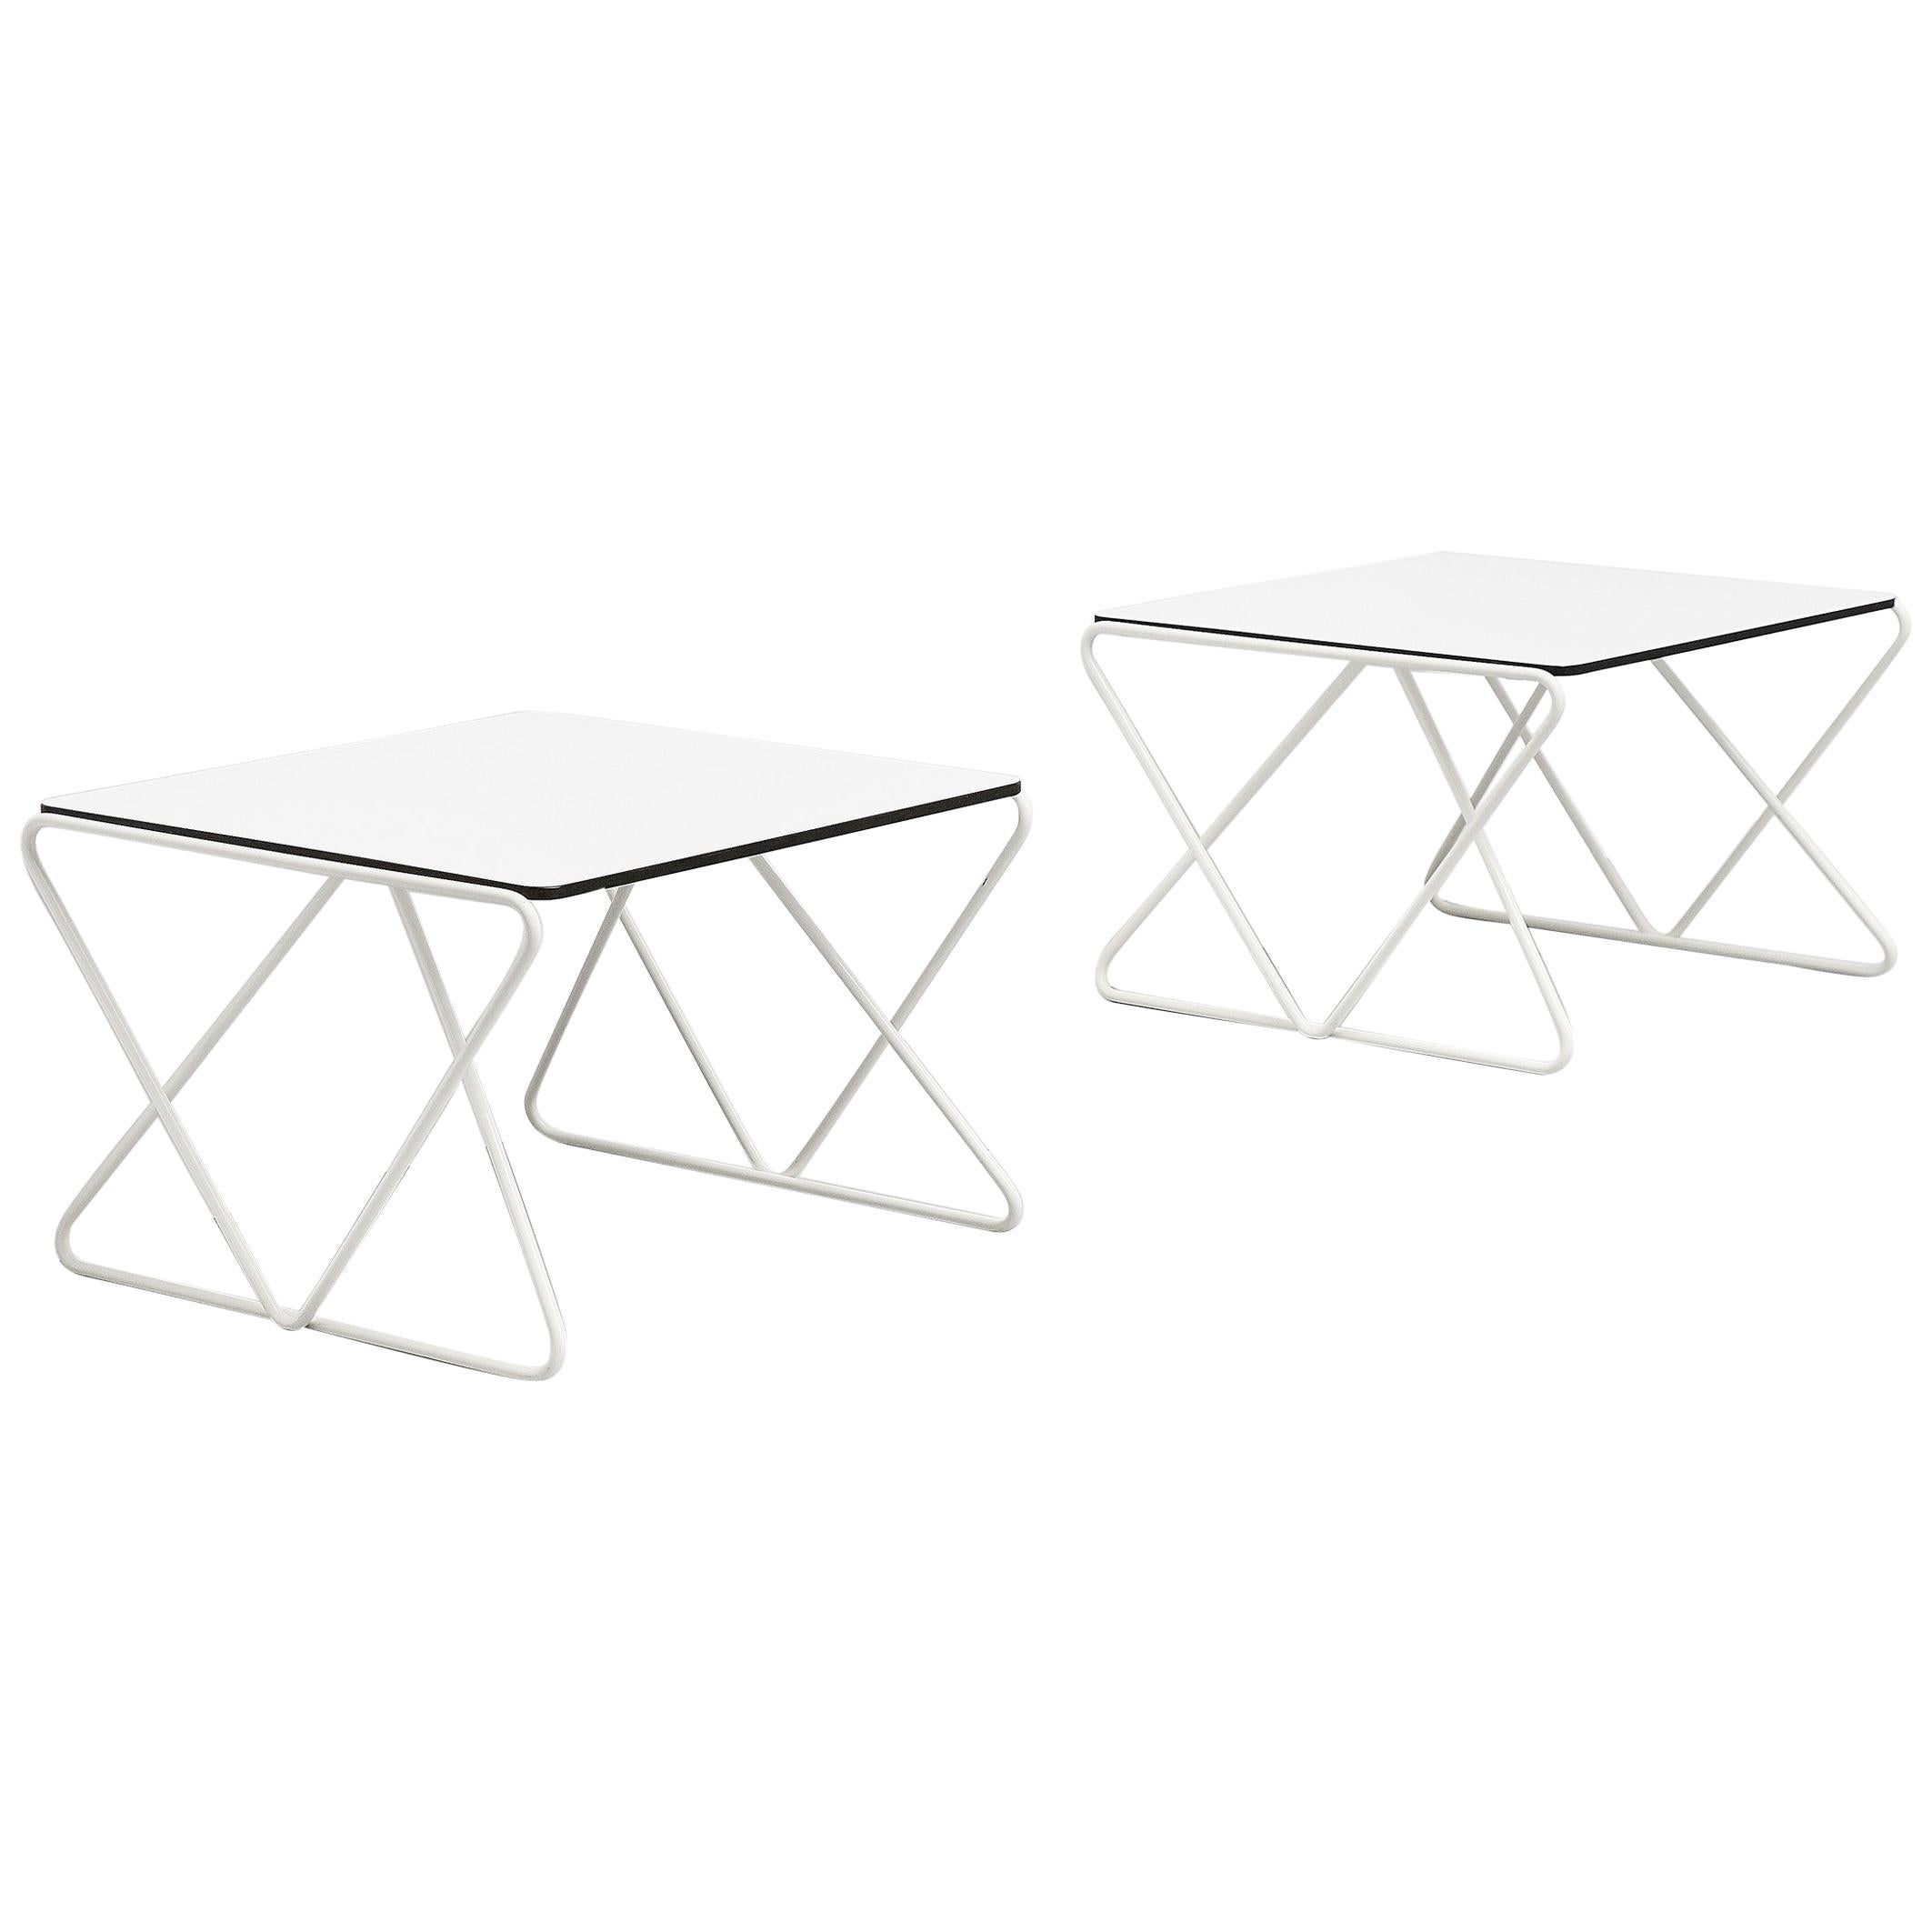 Walter Antonis Side Tables for I-Form Holland, 1978